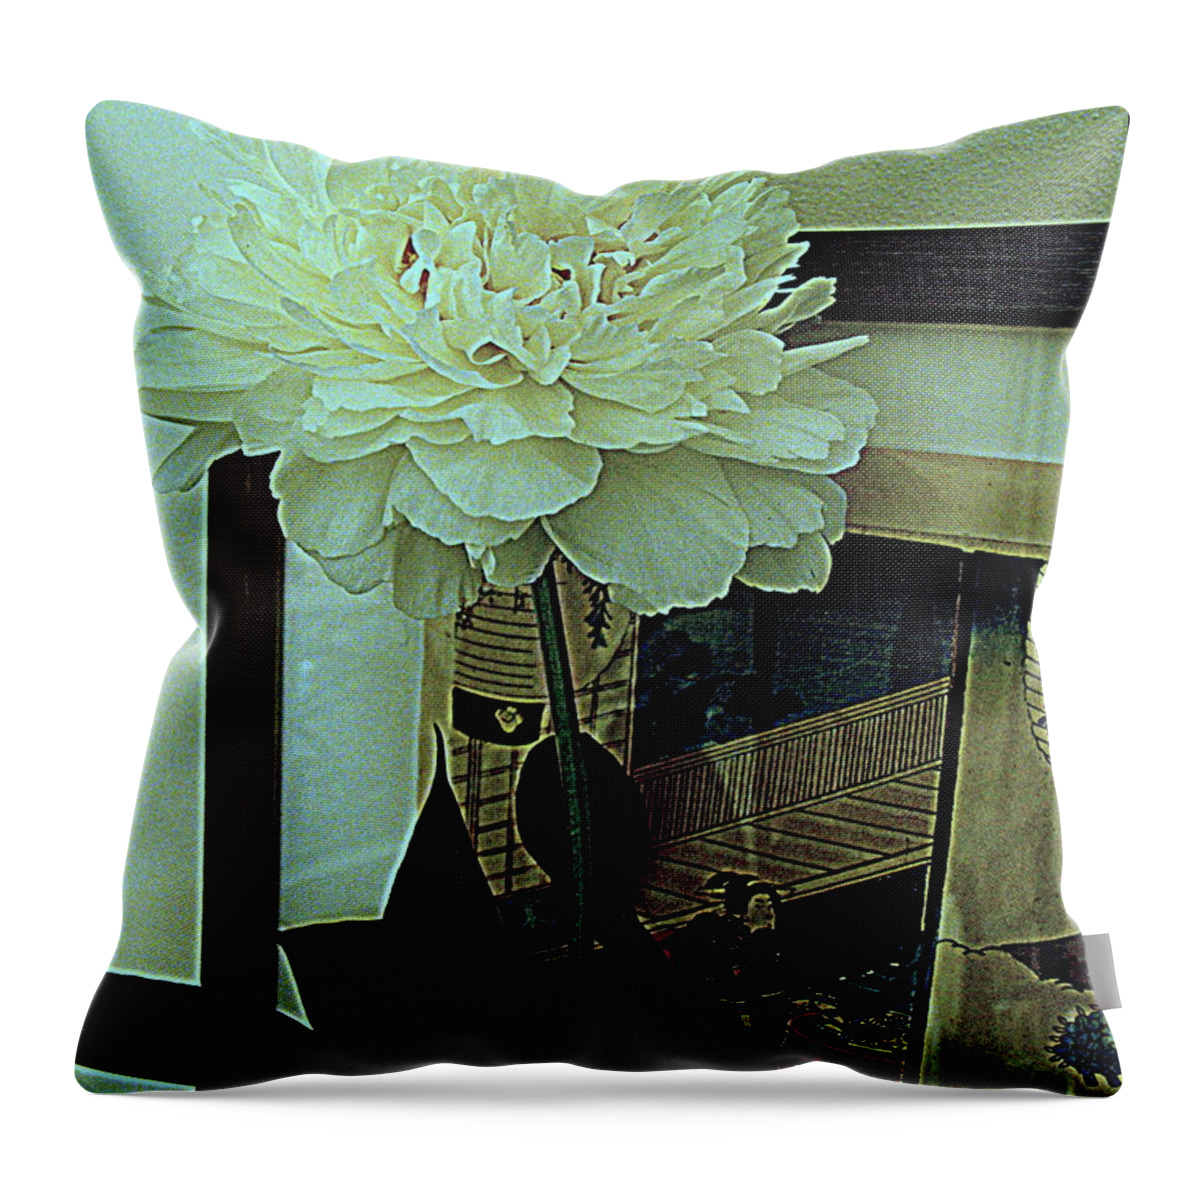 Photography Throw Pillow featuring the photograph Peony Pose by Nancy Kane Chapman